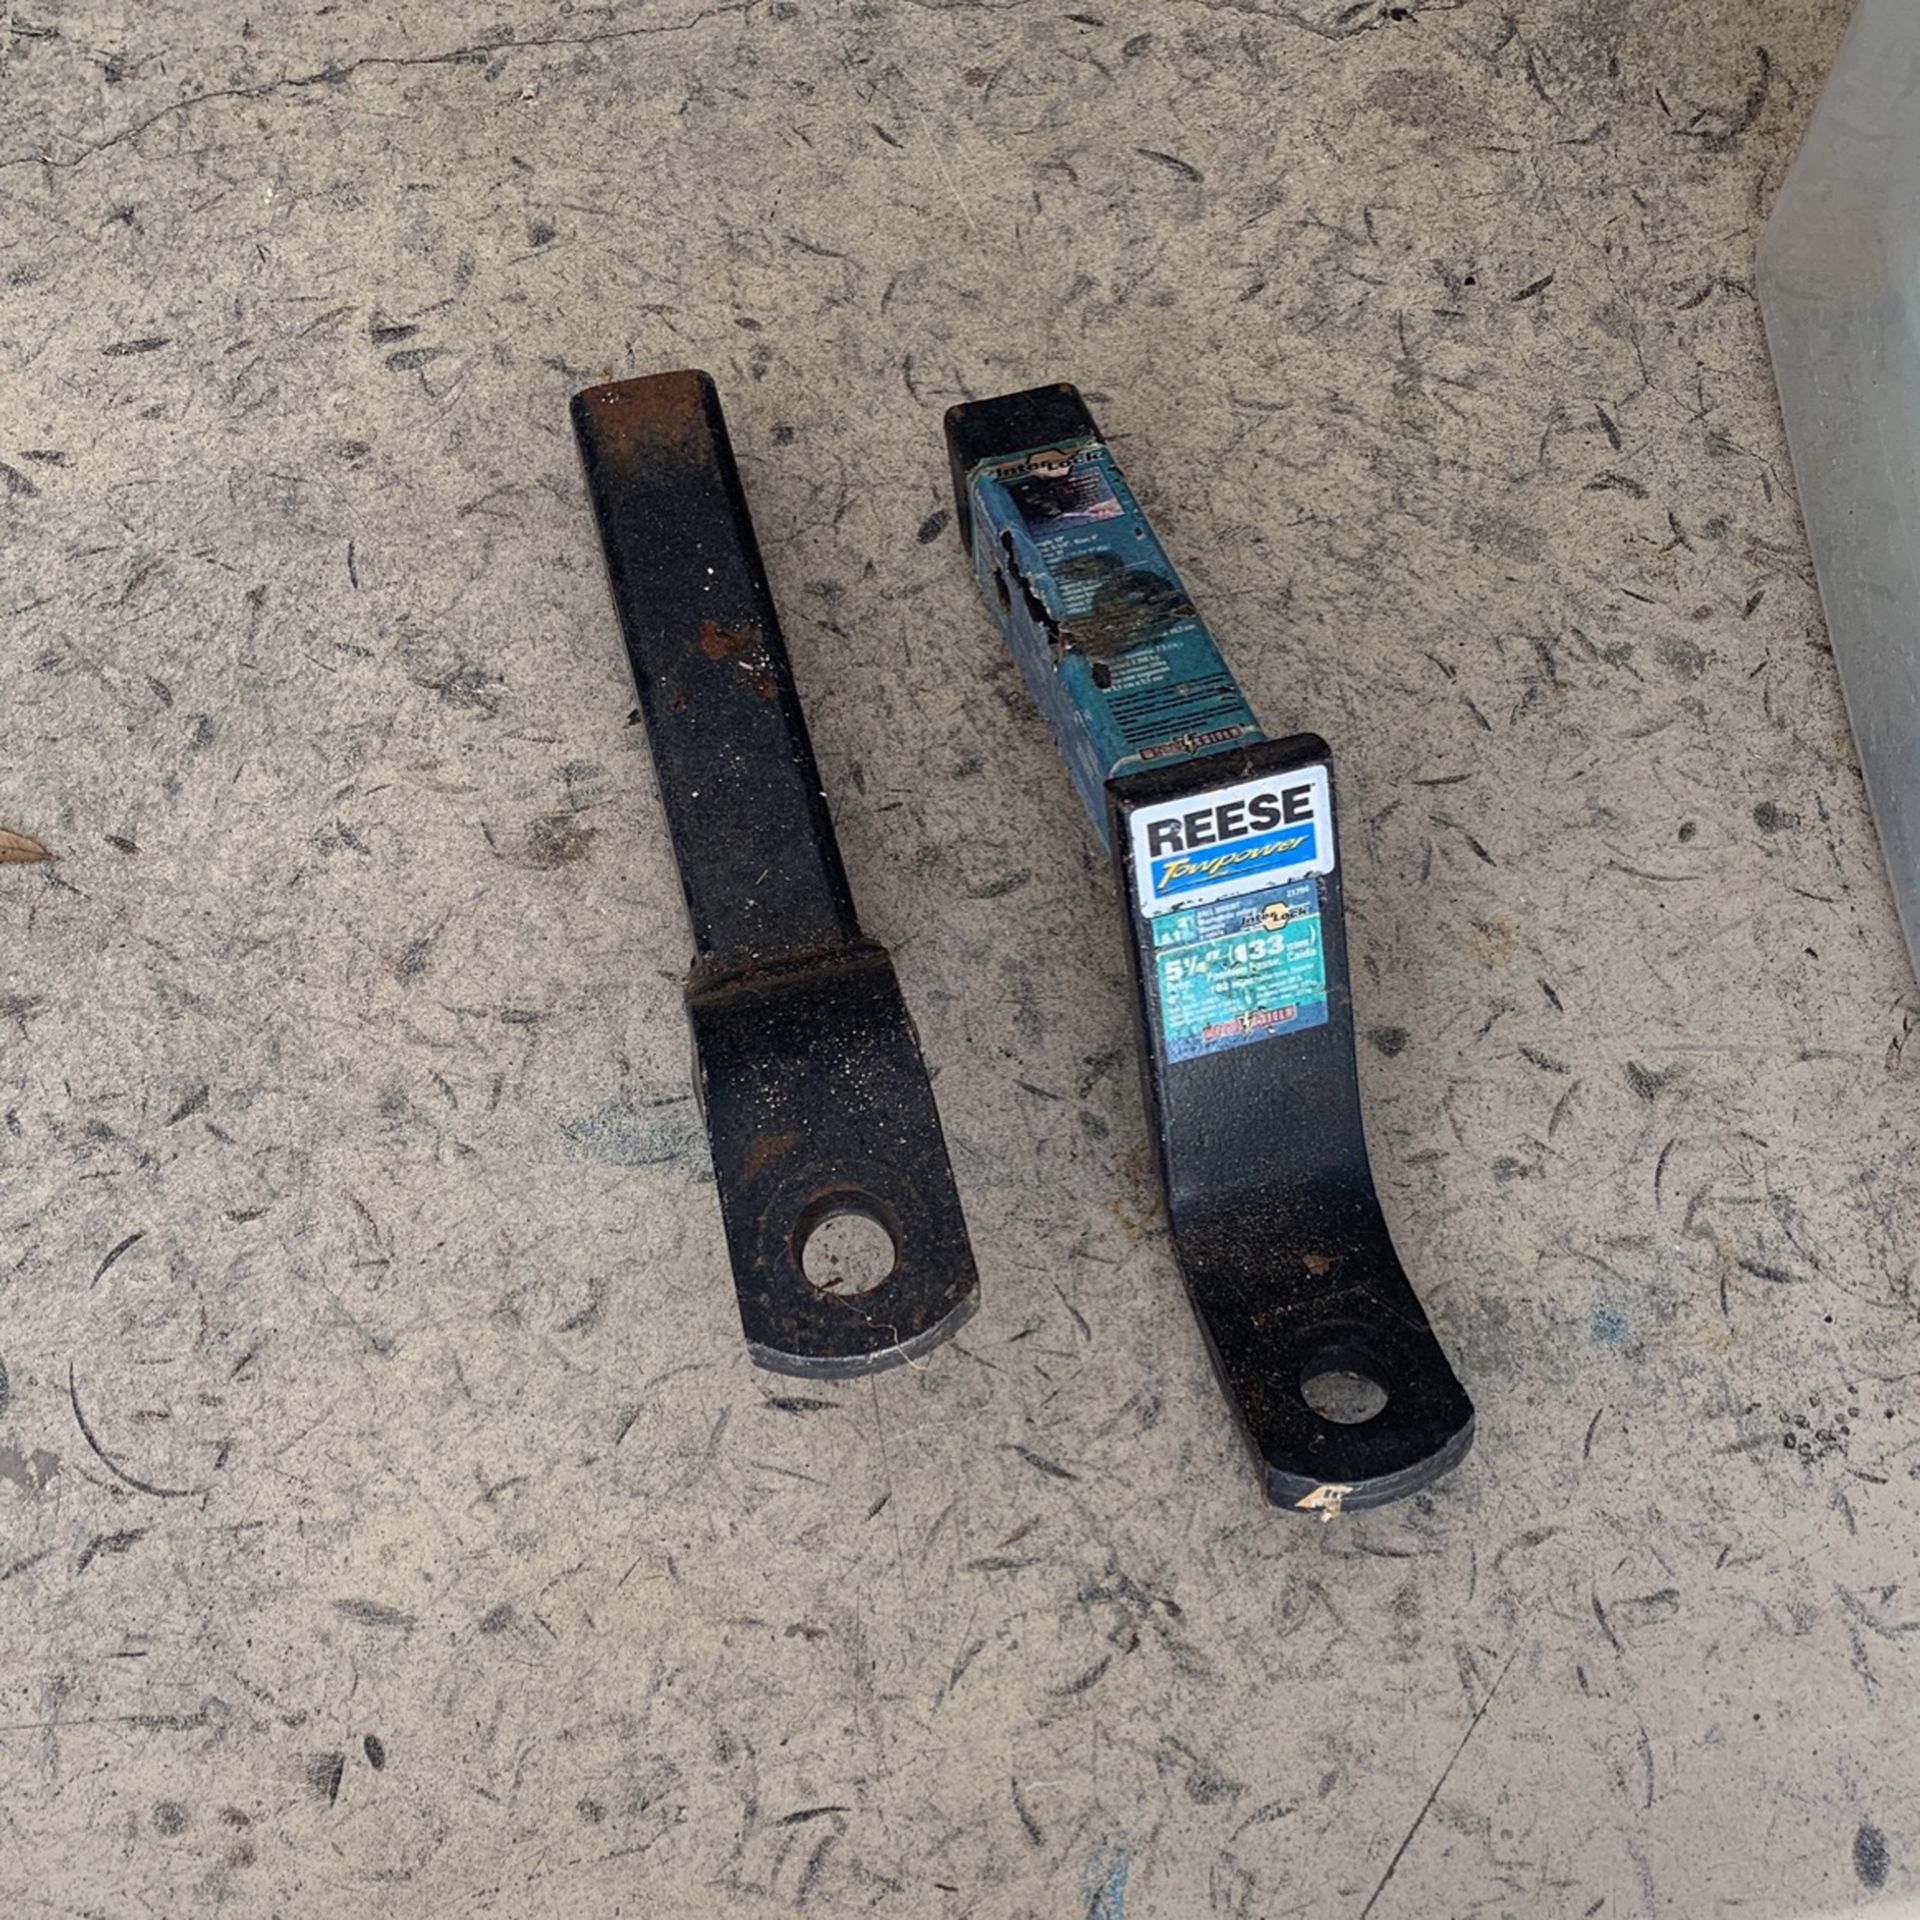 2 Trailer Hitch’s With No Ball/pin- 5.00 Each- Pick Up Only